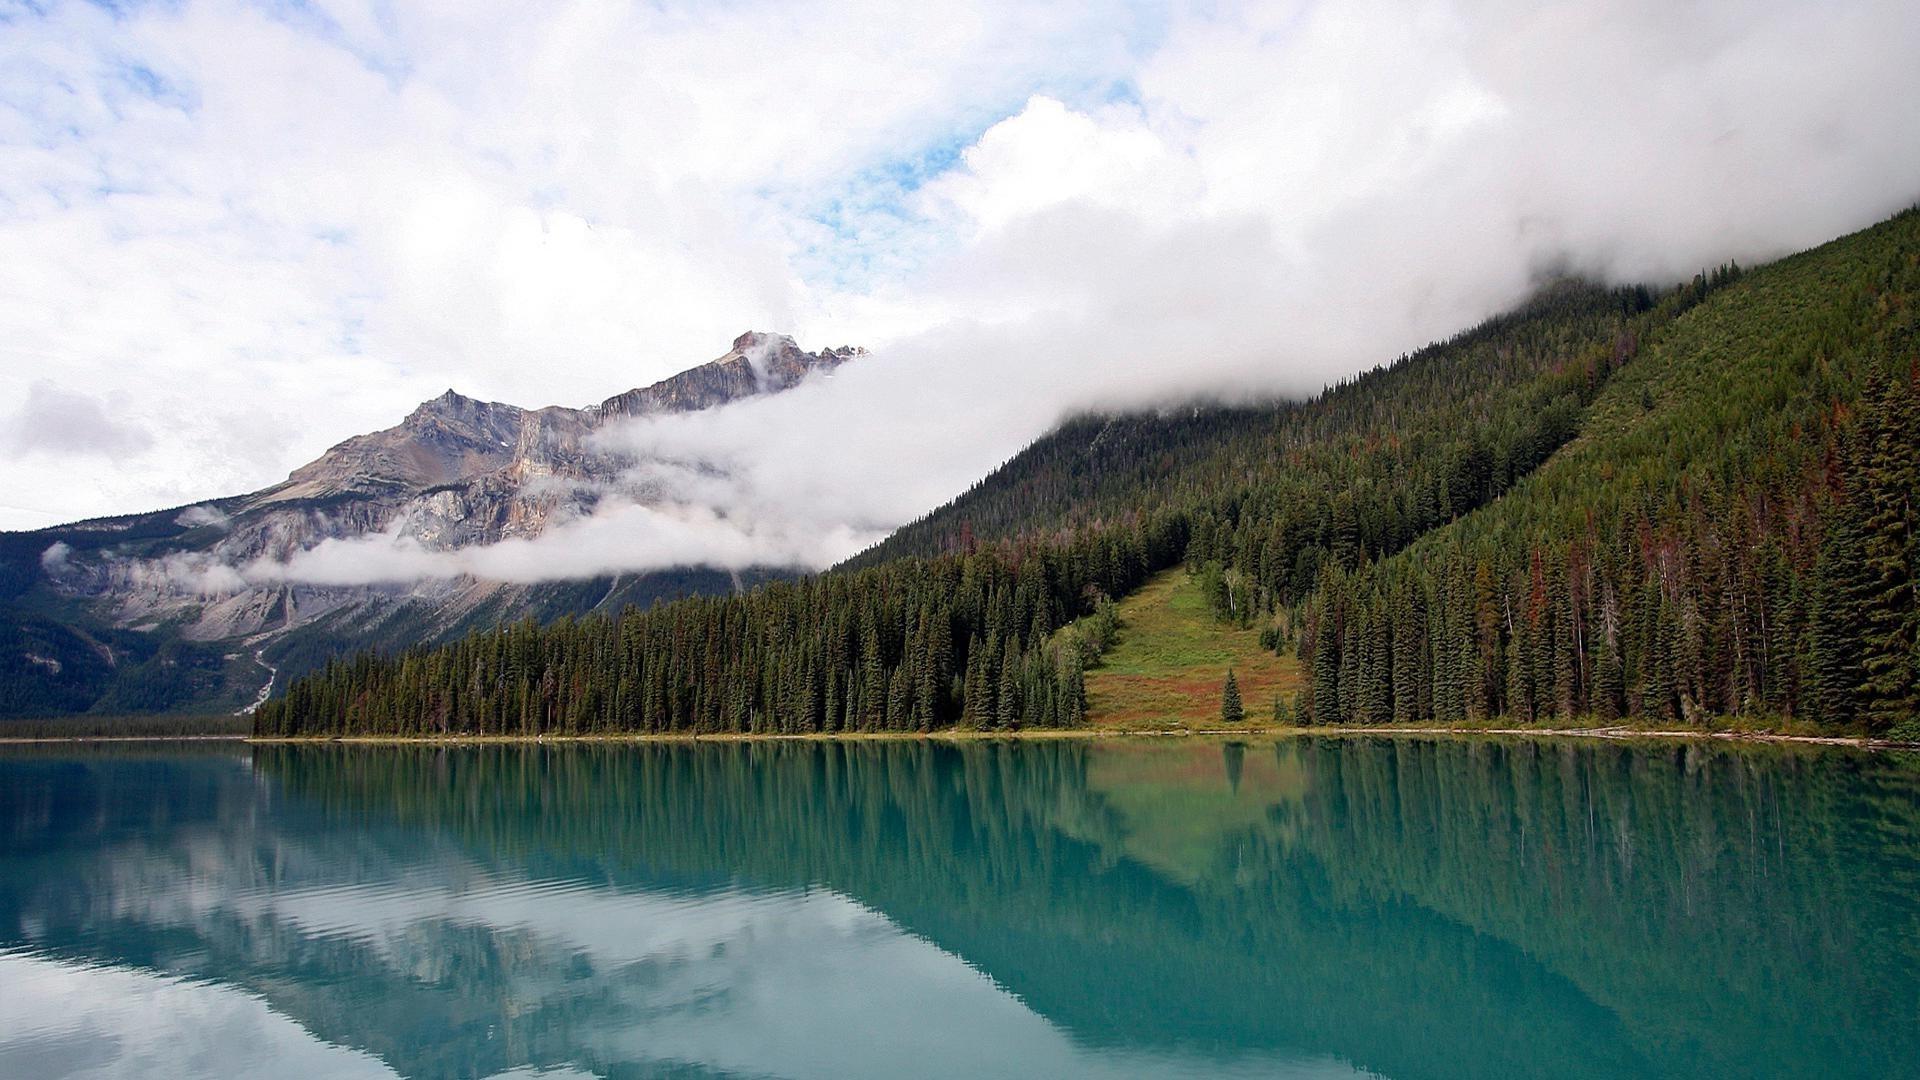 A beautiful lake surrounded by mountains, pine forest and clouds